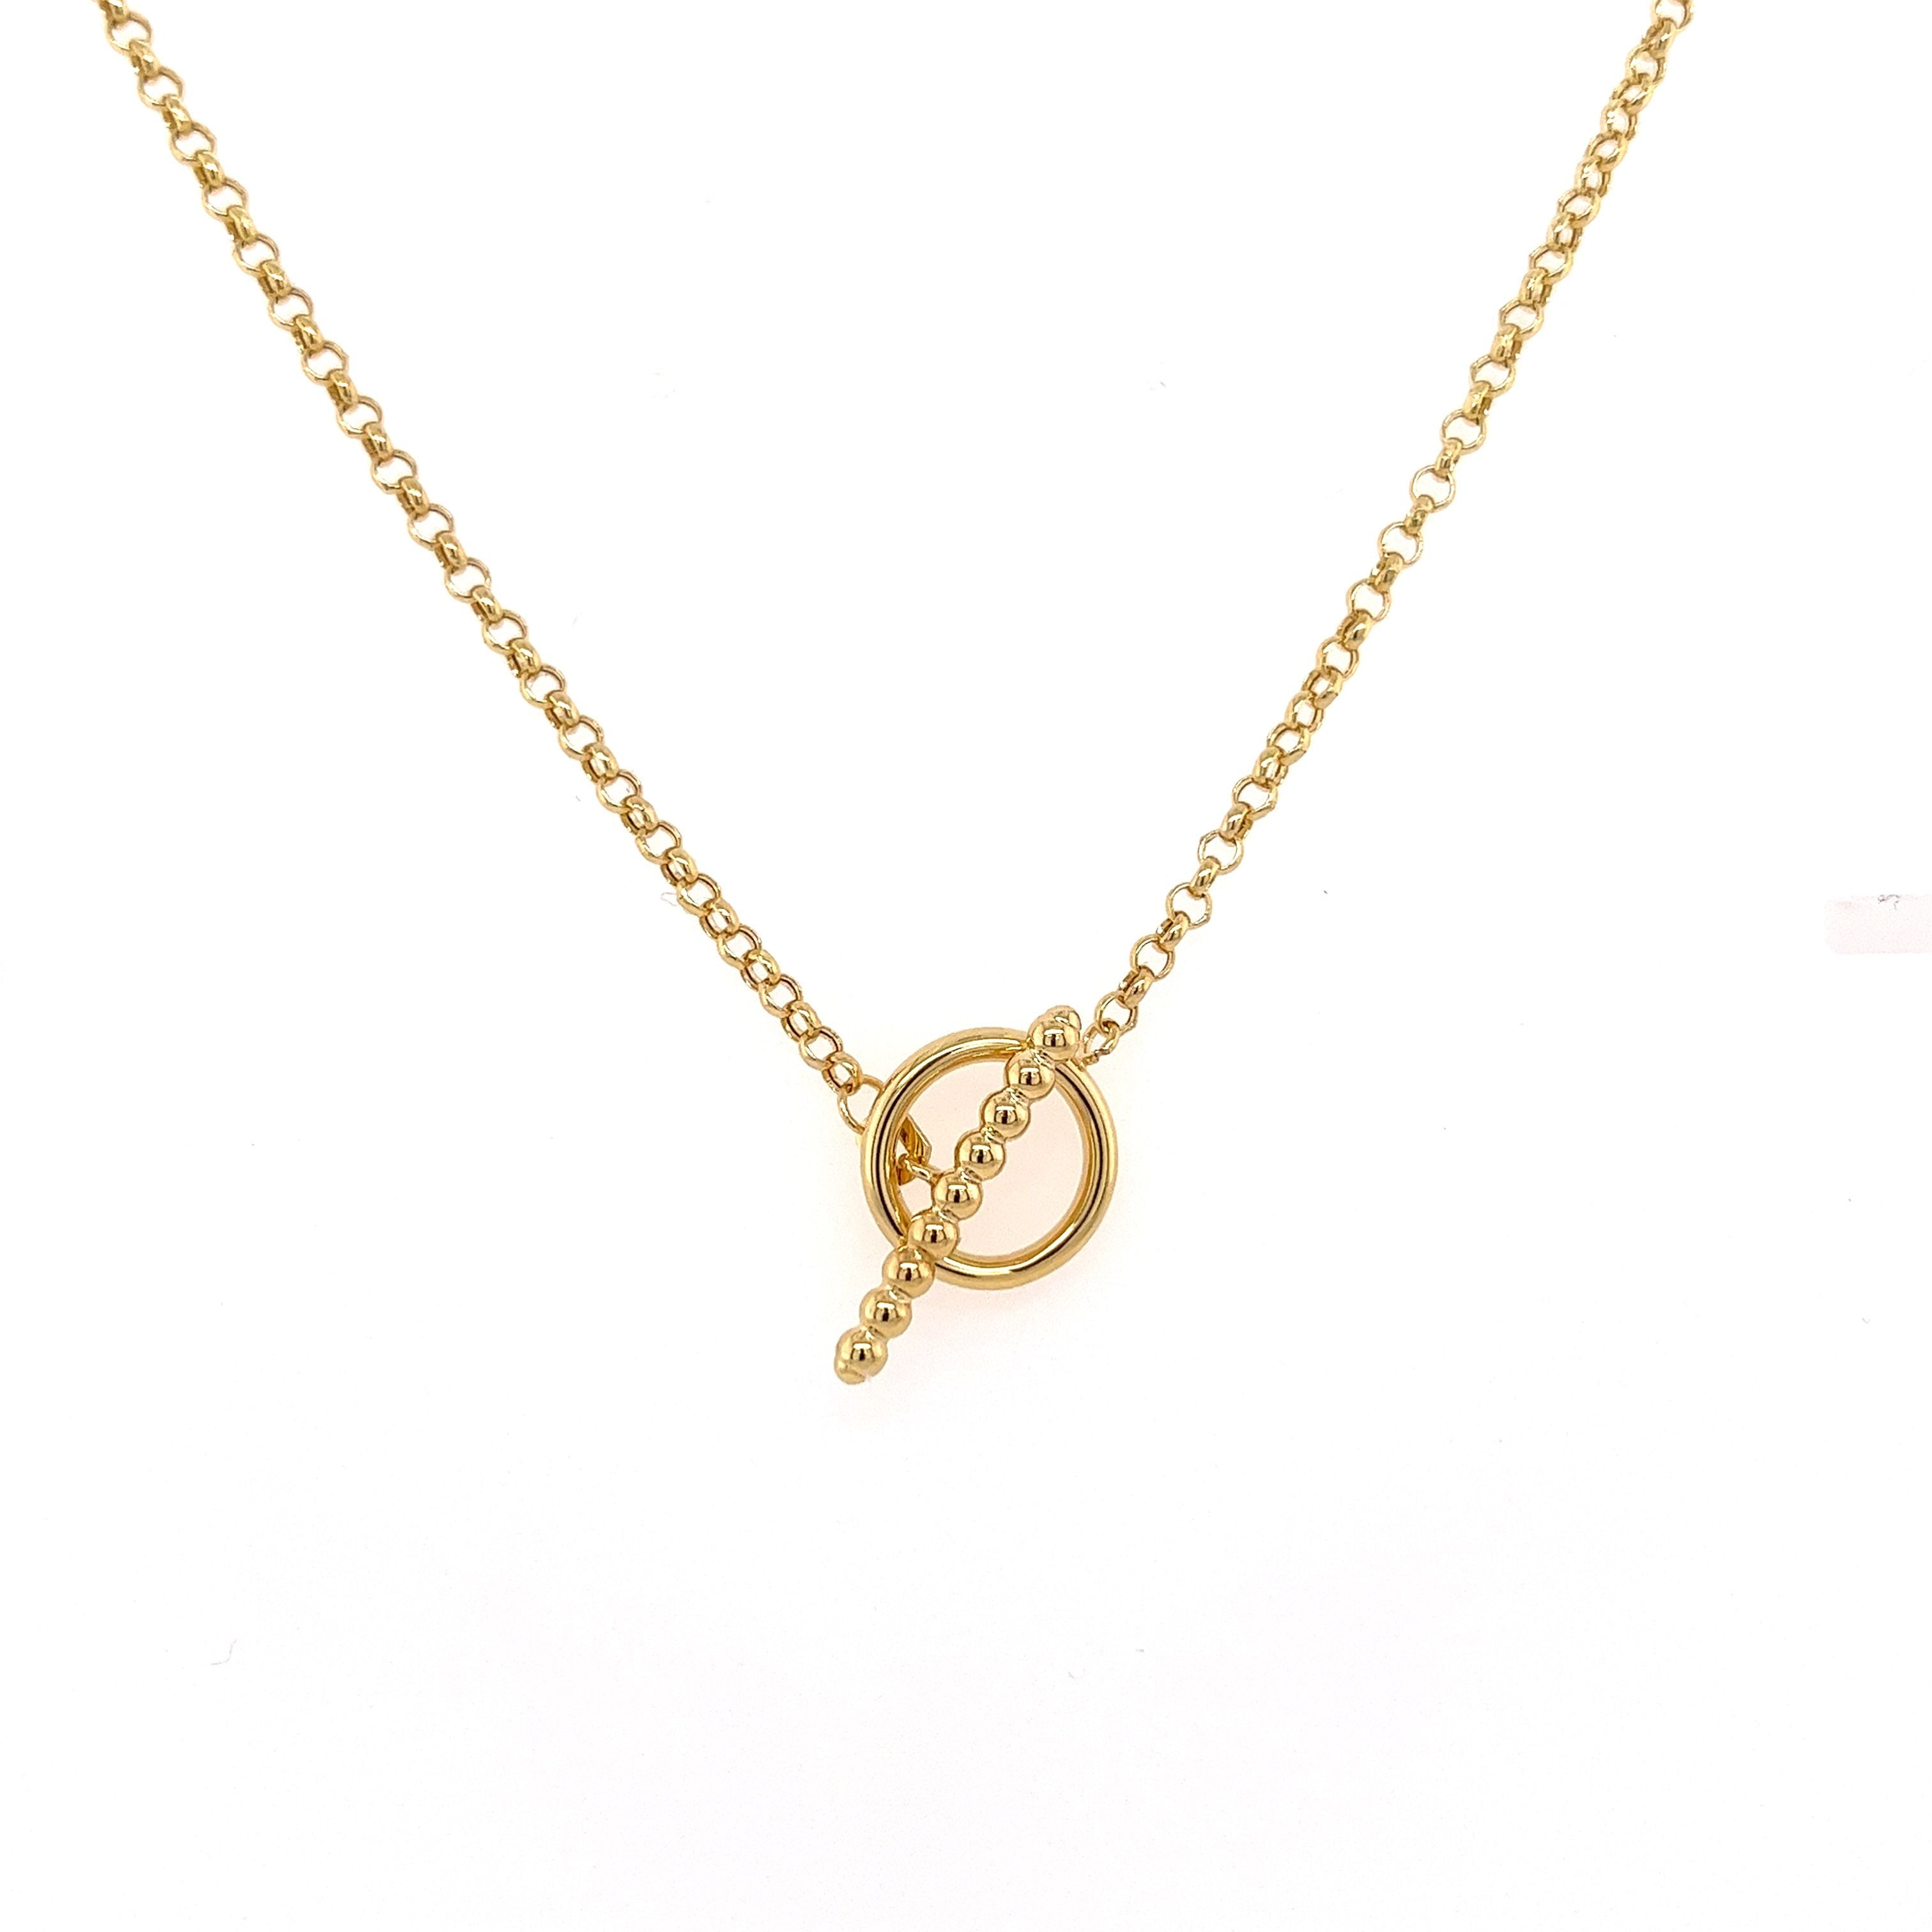 14K Gold Bar and Toggle Chain Necklace | 18 Inches - 1.5mm-Chains-ASSAY